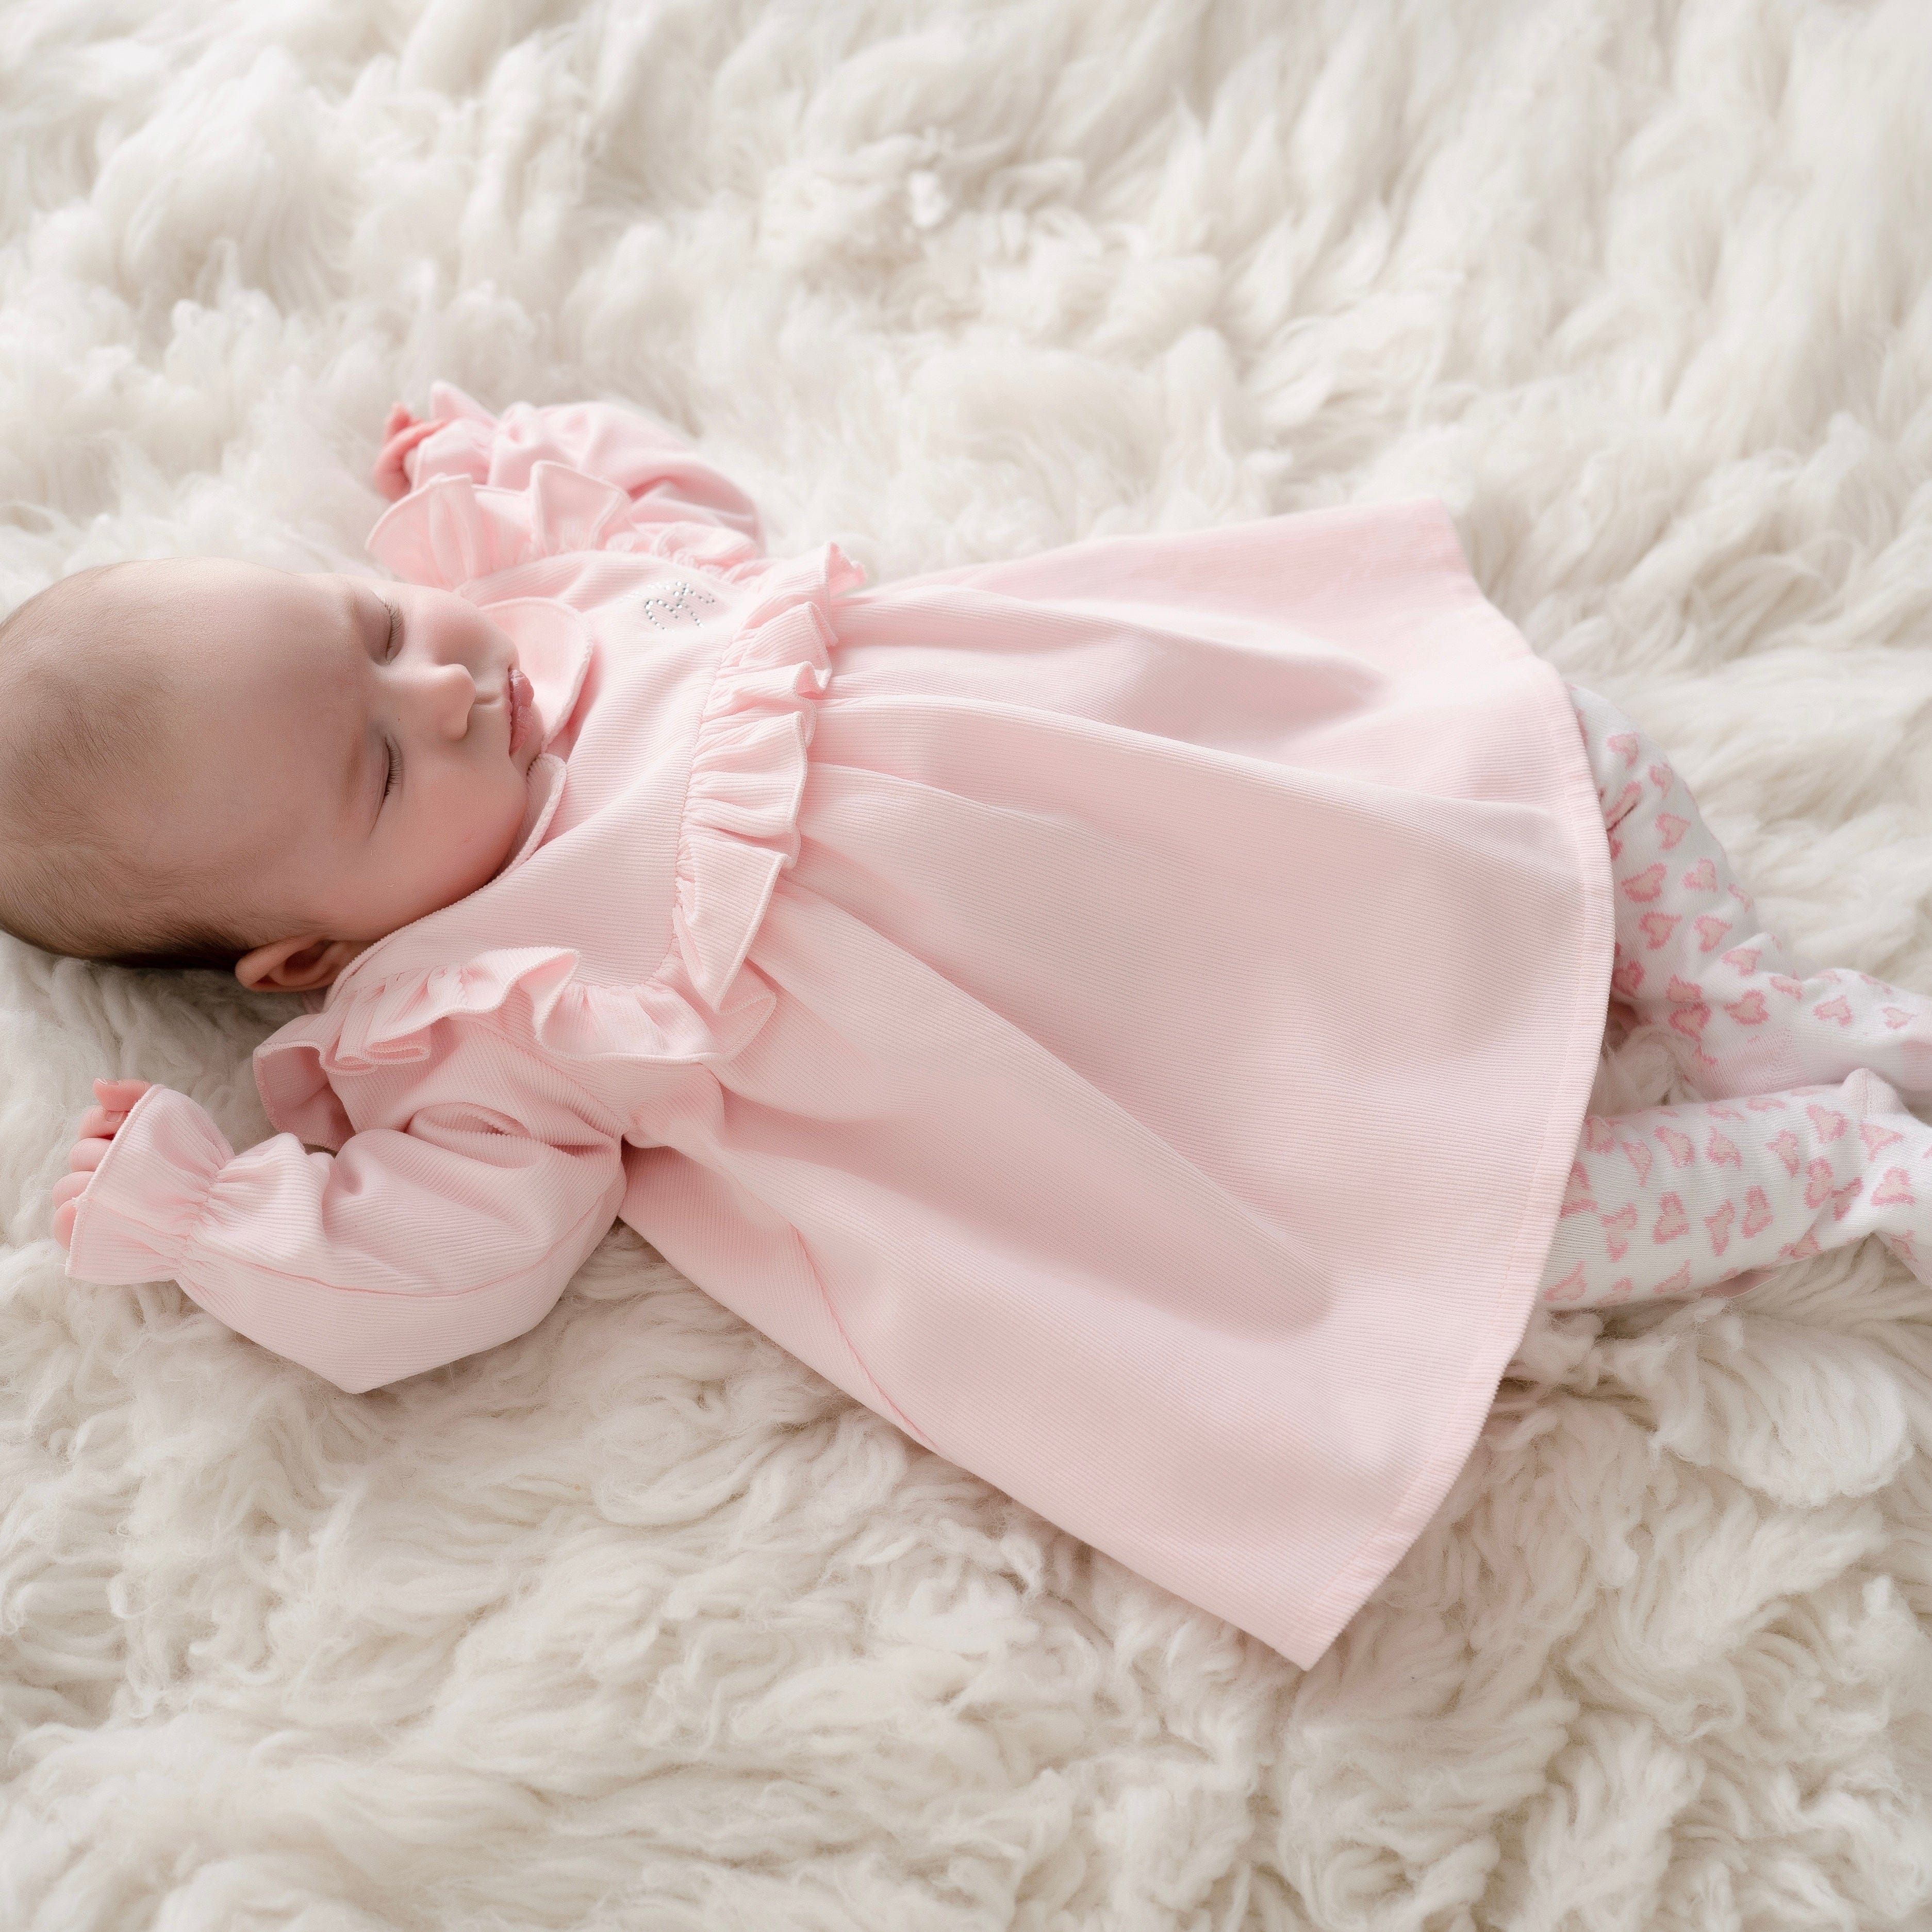 LITTLE A - Elspeth baby Cord Dress - Baby Pink